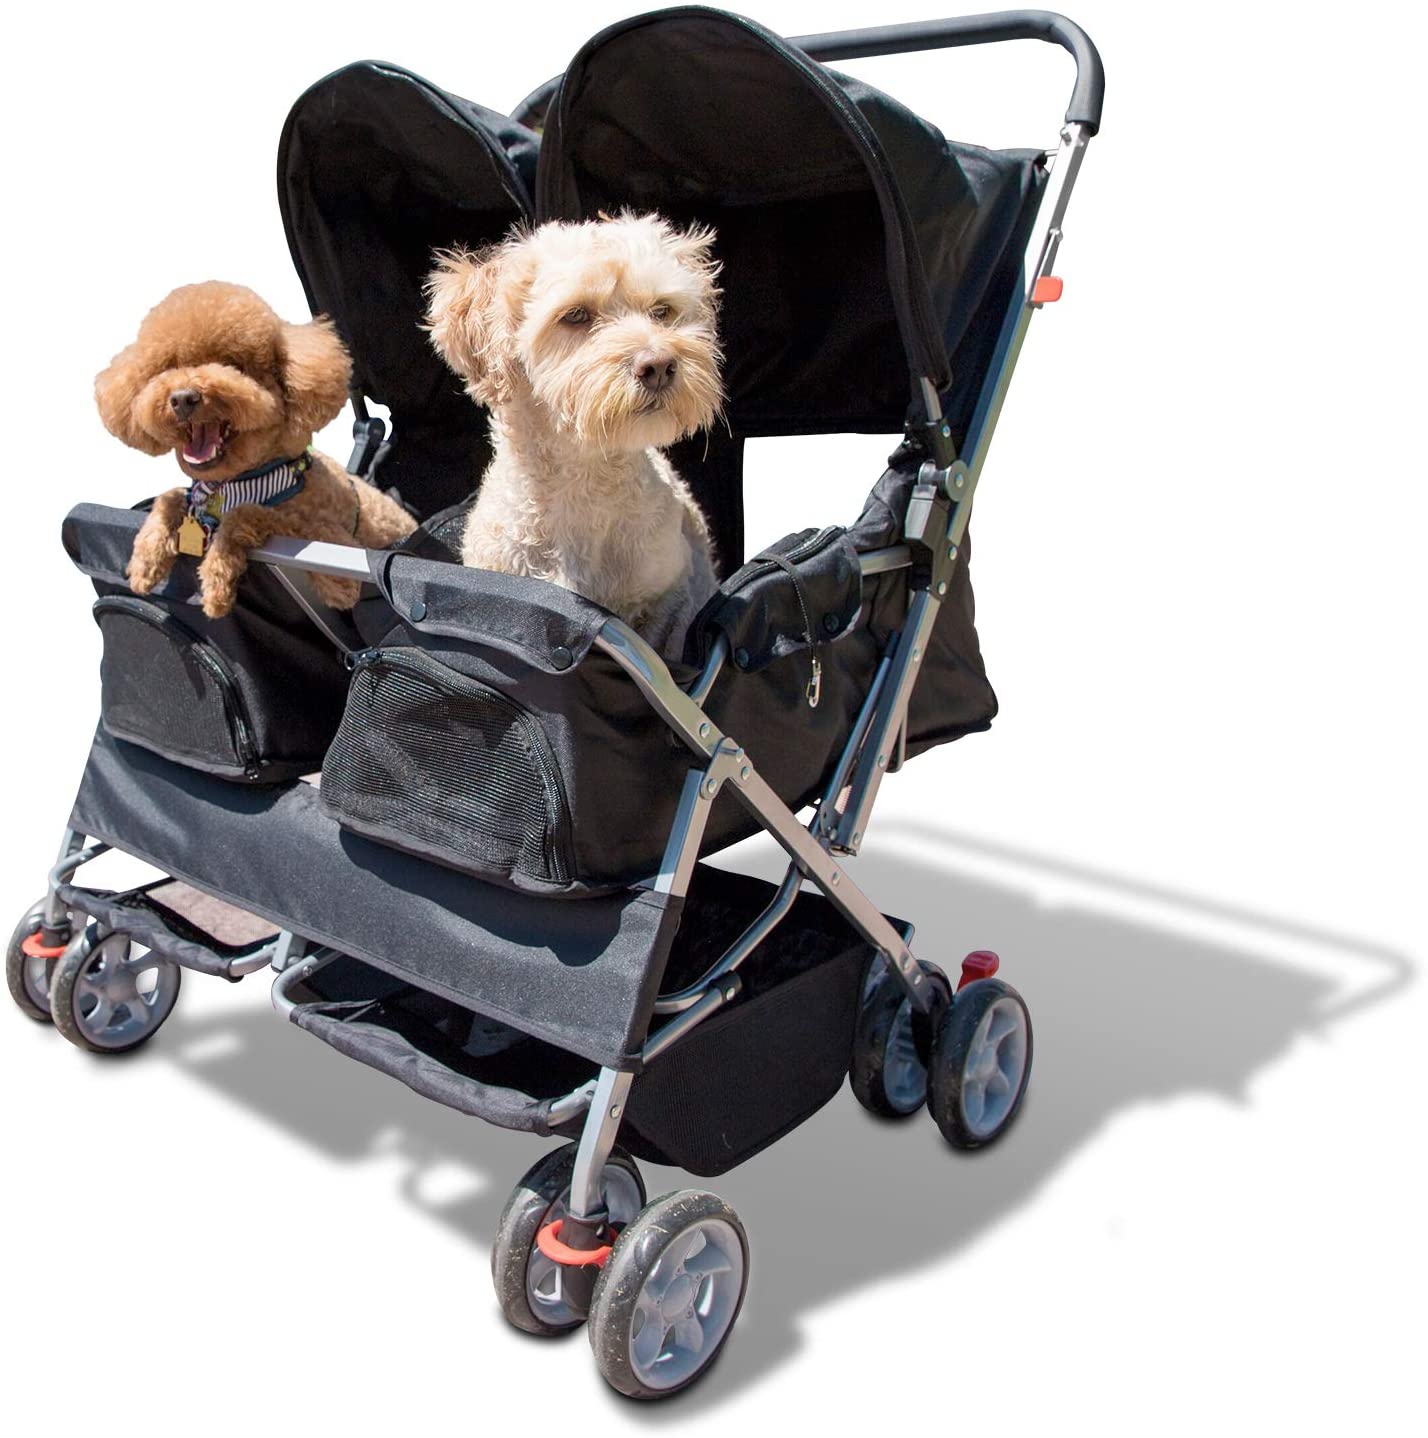 Best Dog and Baby Stroller Combo-